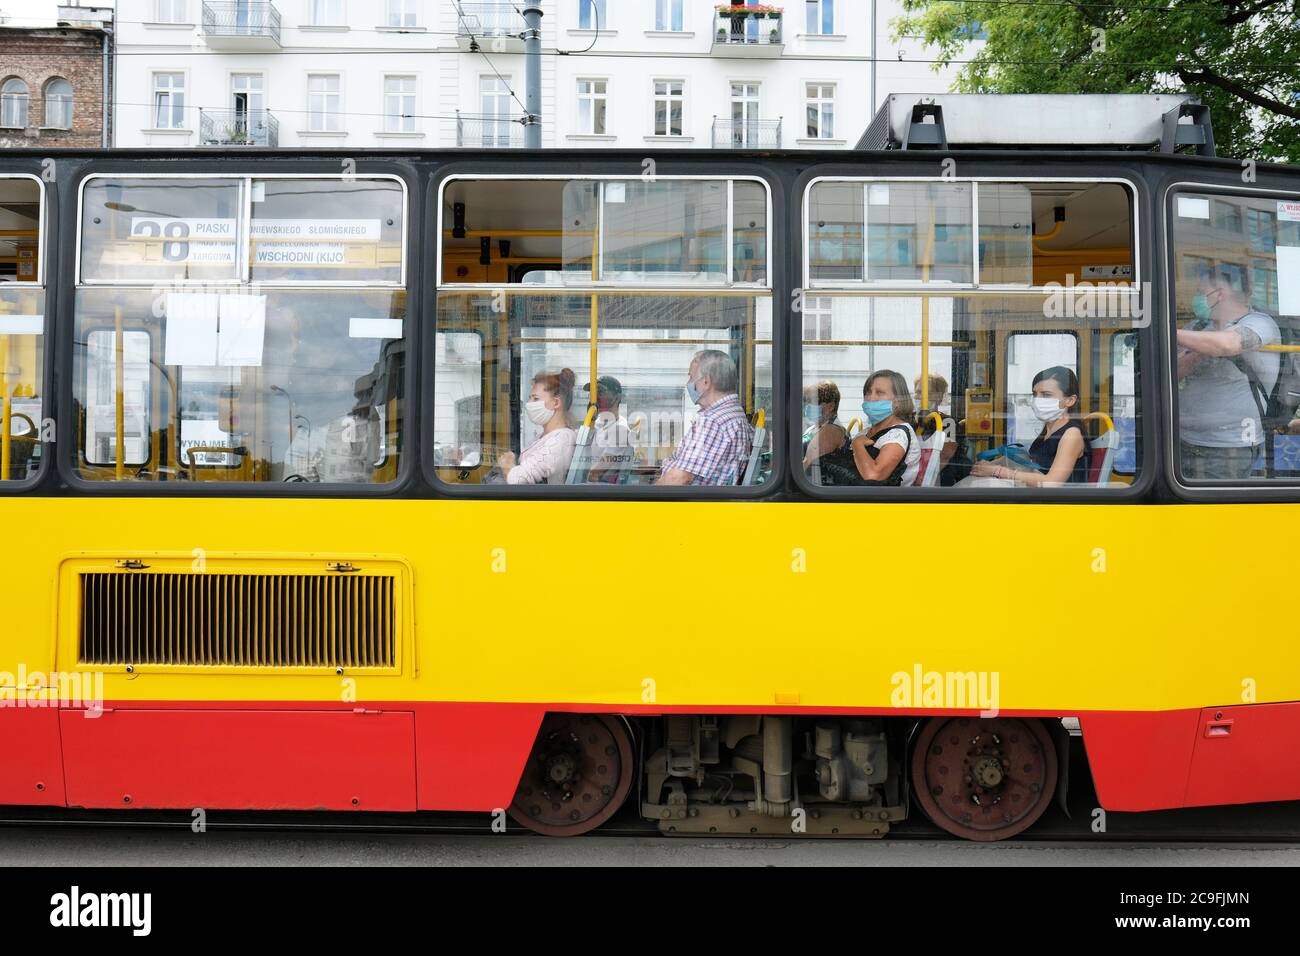 Warsaw, Poland - Friday 31st July 2020 - Passengers on a city tram wear protective facemasks in the Praga district of Warsaw today as the number of new cases reported was yet another record with 657 new Coronavirus infections. There are fears that a second wave of Covid-19 is imminent. Photo Steven May / Alamy Live News Stock Photo